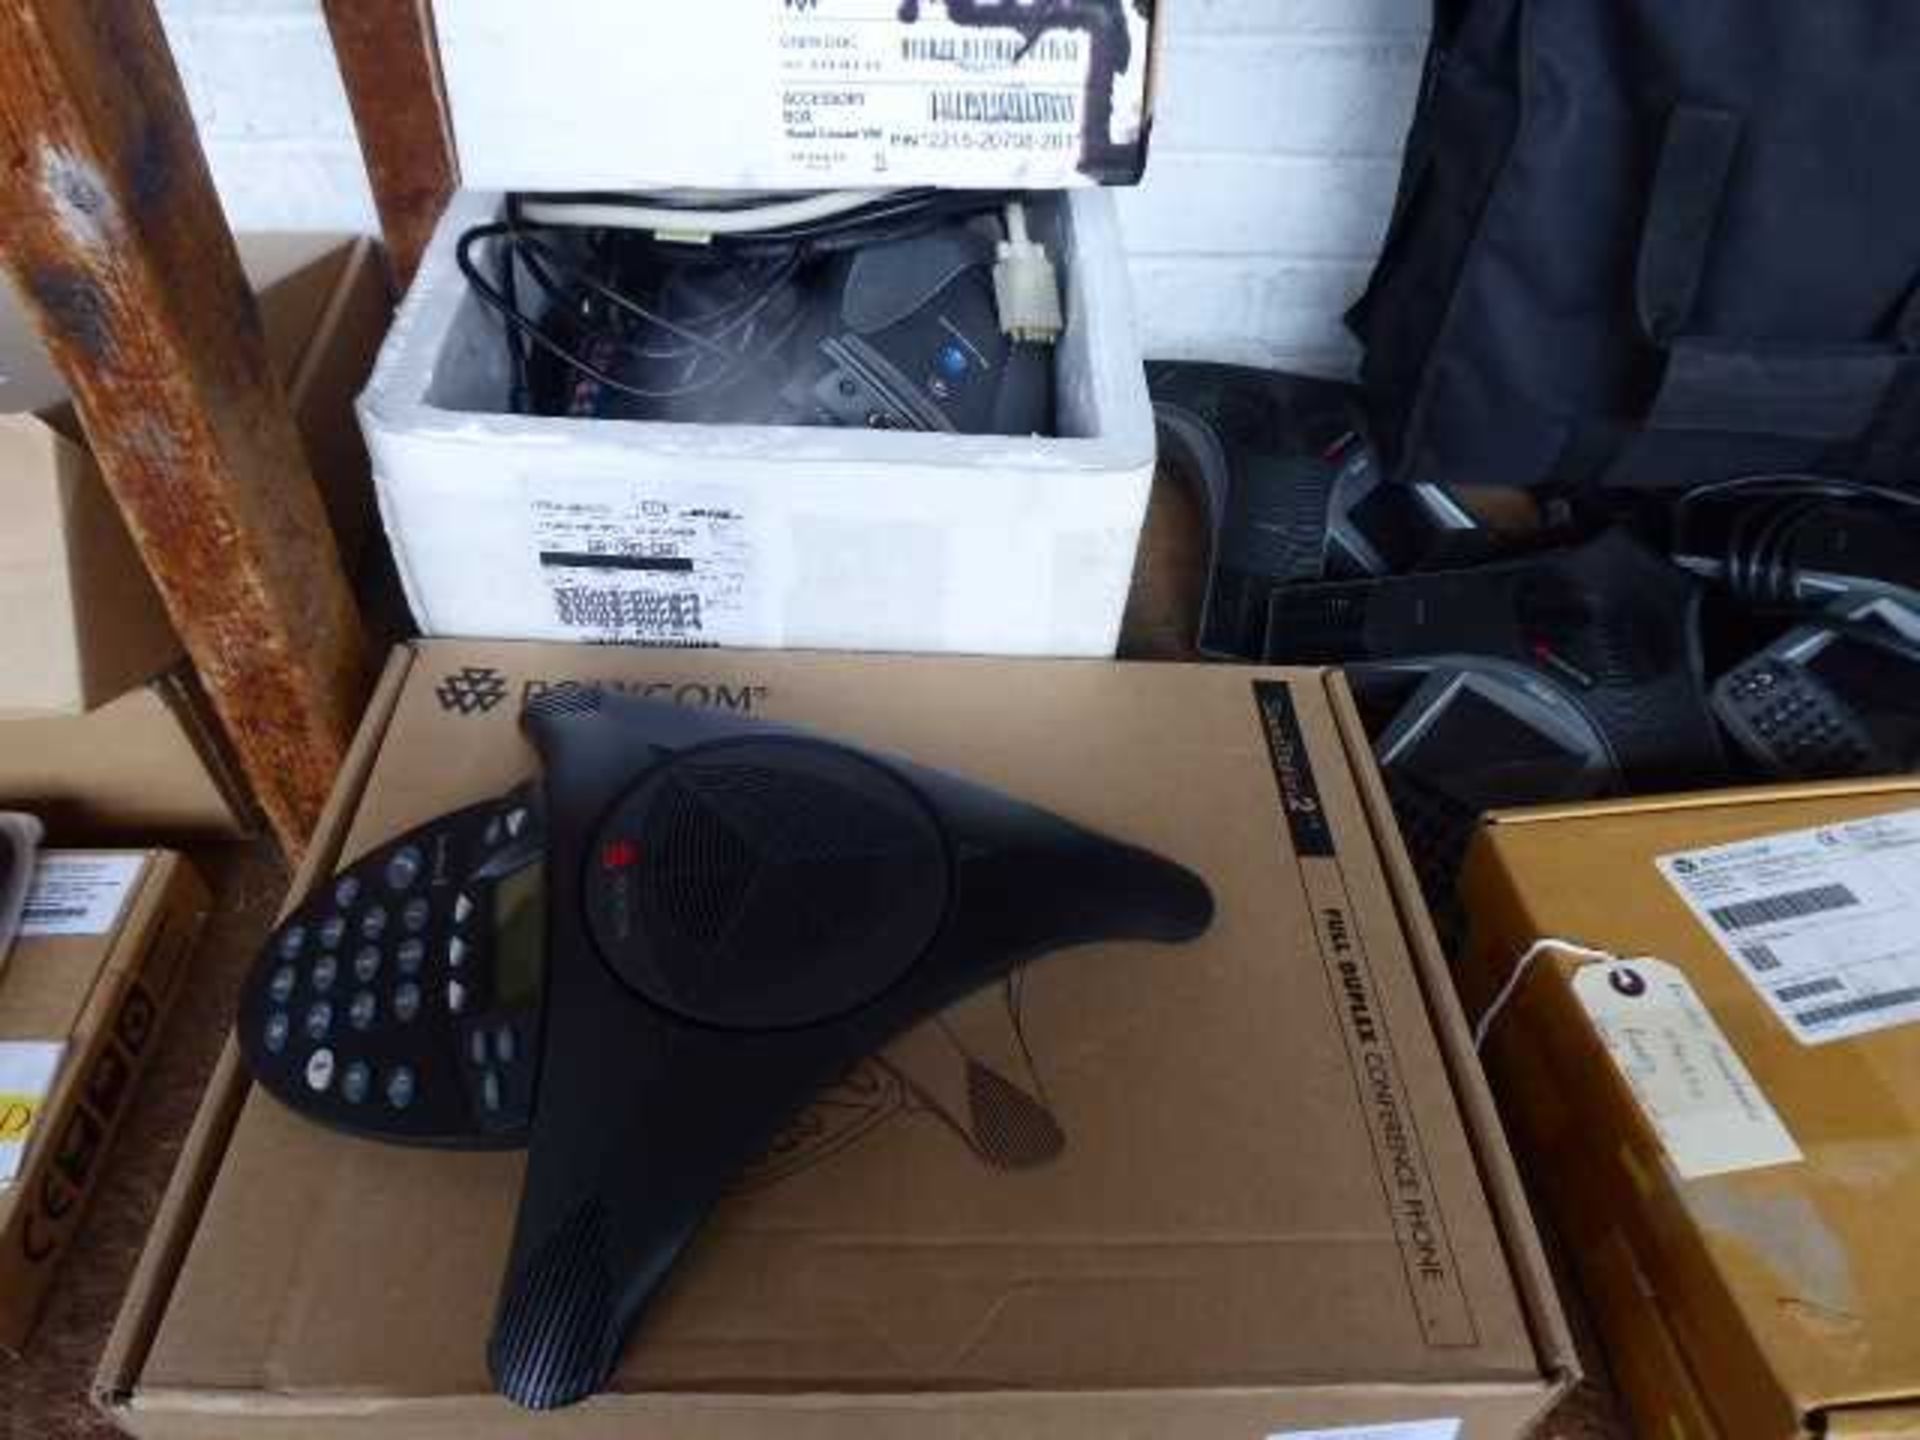 +VAT Shelf of assorted Polycom products incl. conference phones, speakers, cameras, remotes, etc. - Image 2 of 4